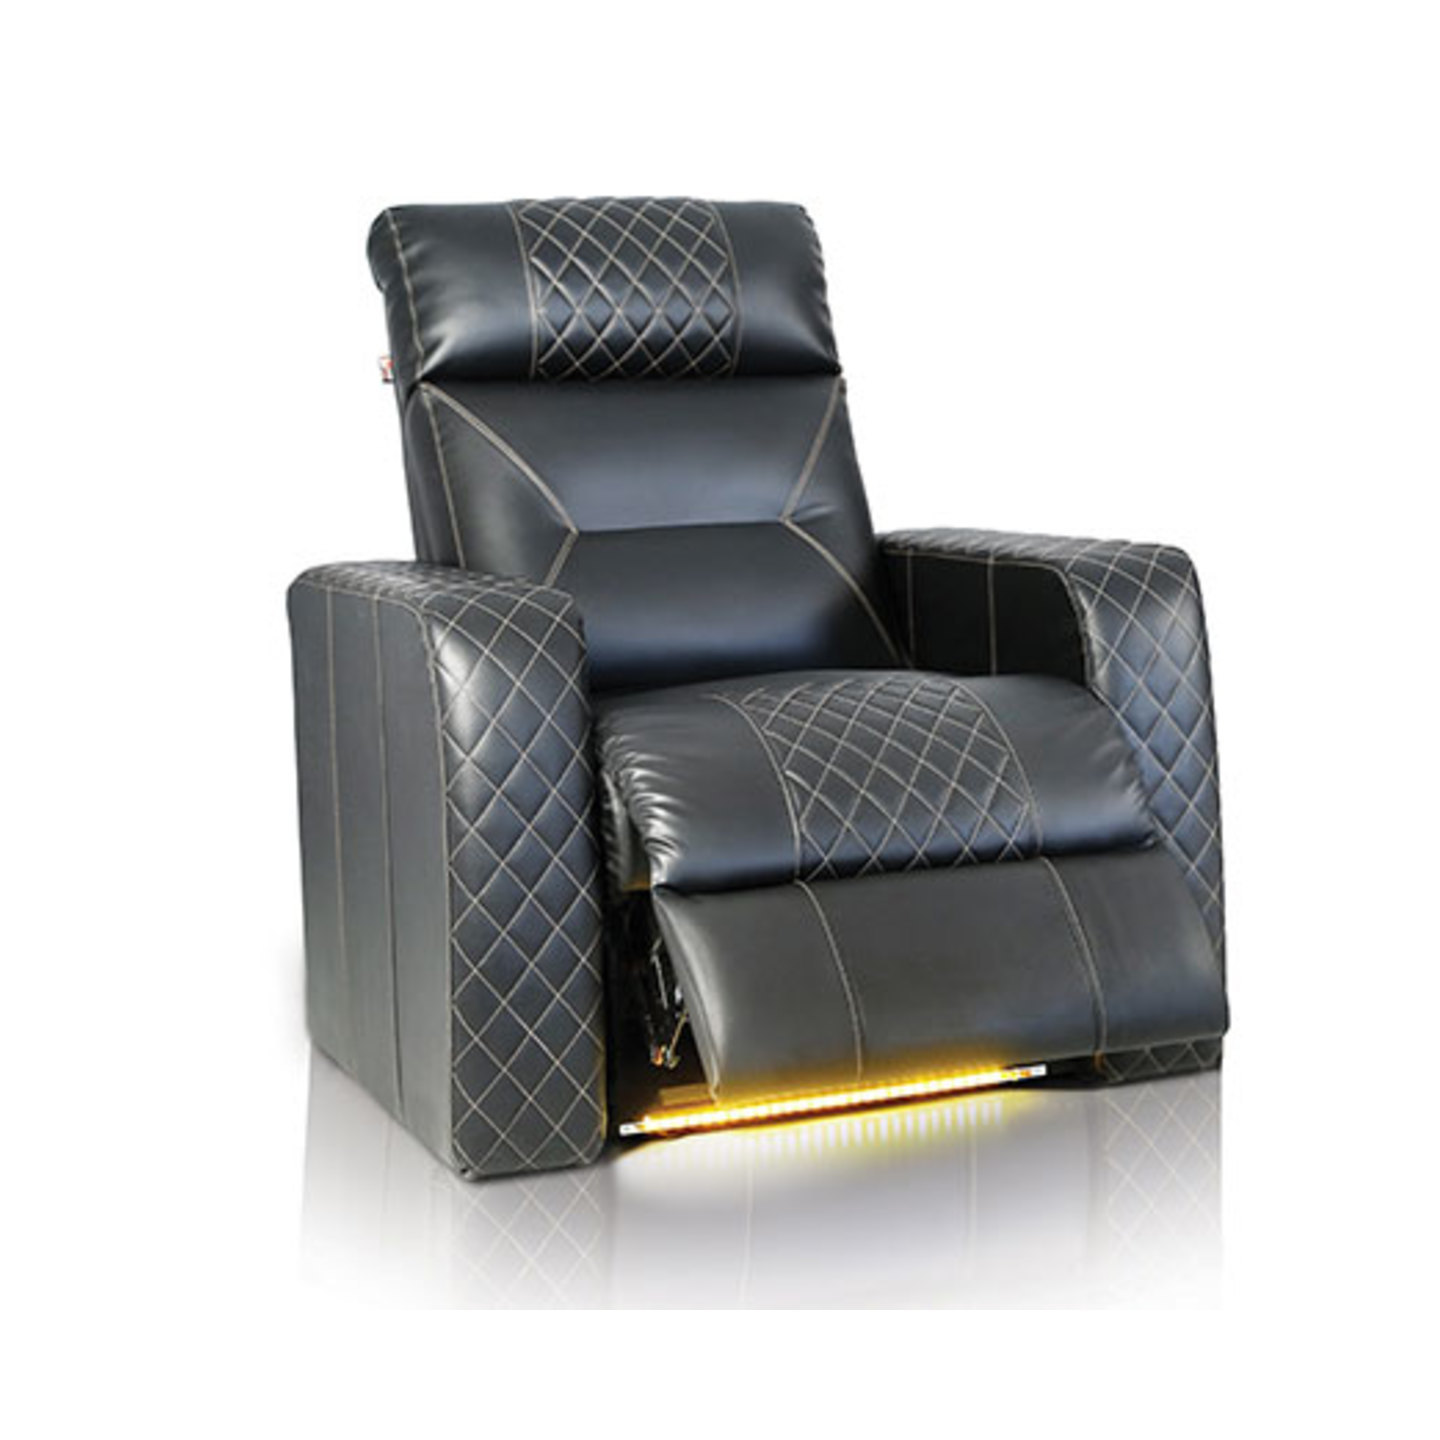 LN Recliner Chair Grande Electronic System In Black Colour